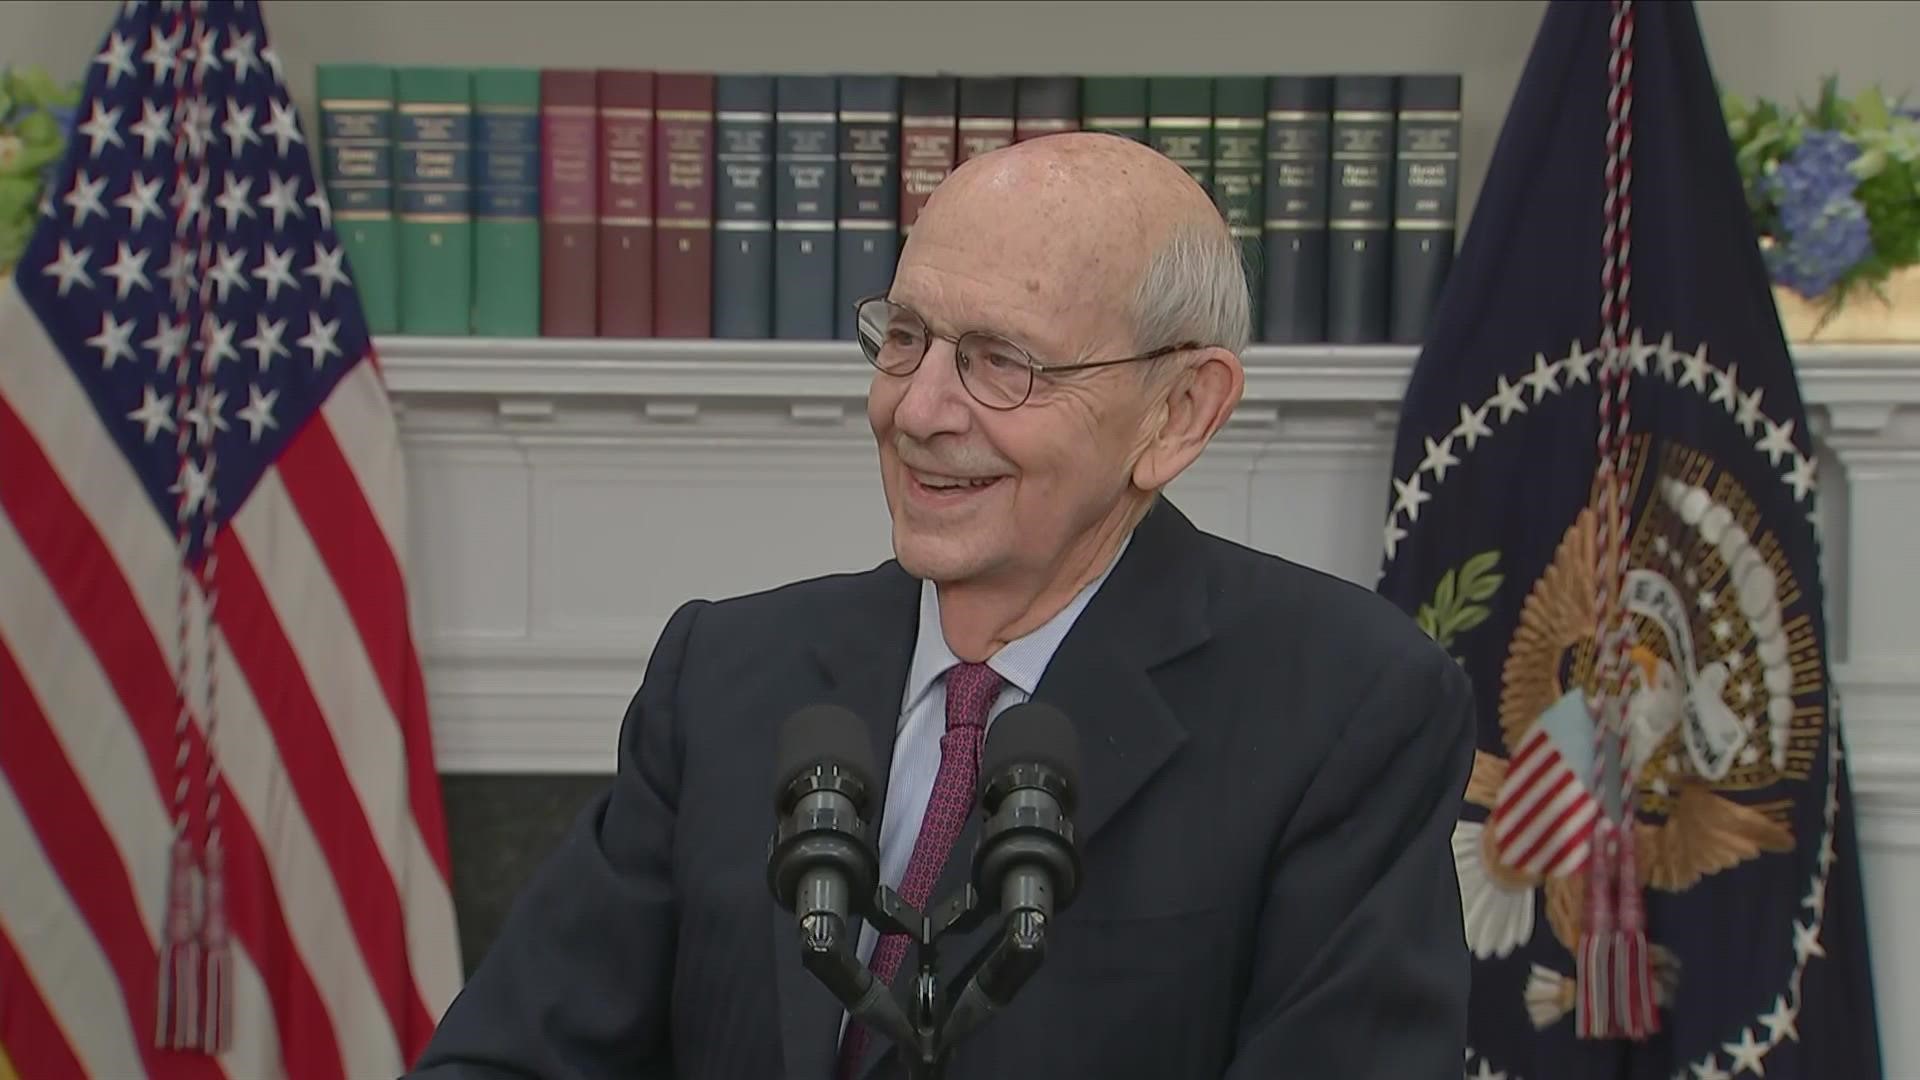 Upon announcing his retirement, Supreme Court Justice Stephen Breyer spoke about what he finds most meaningful about serving on the nation's highest court.